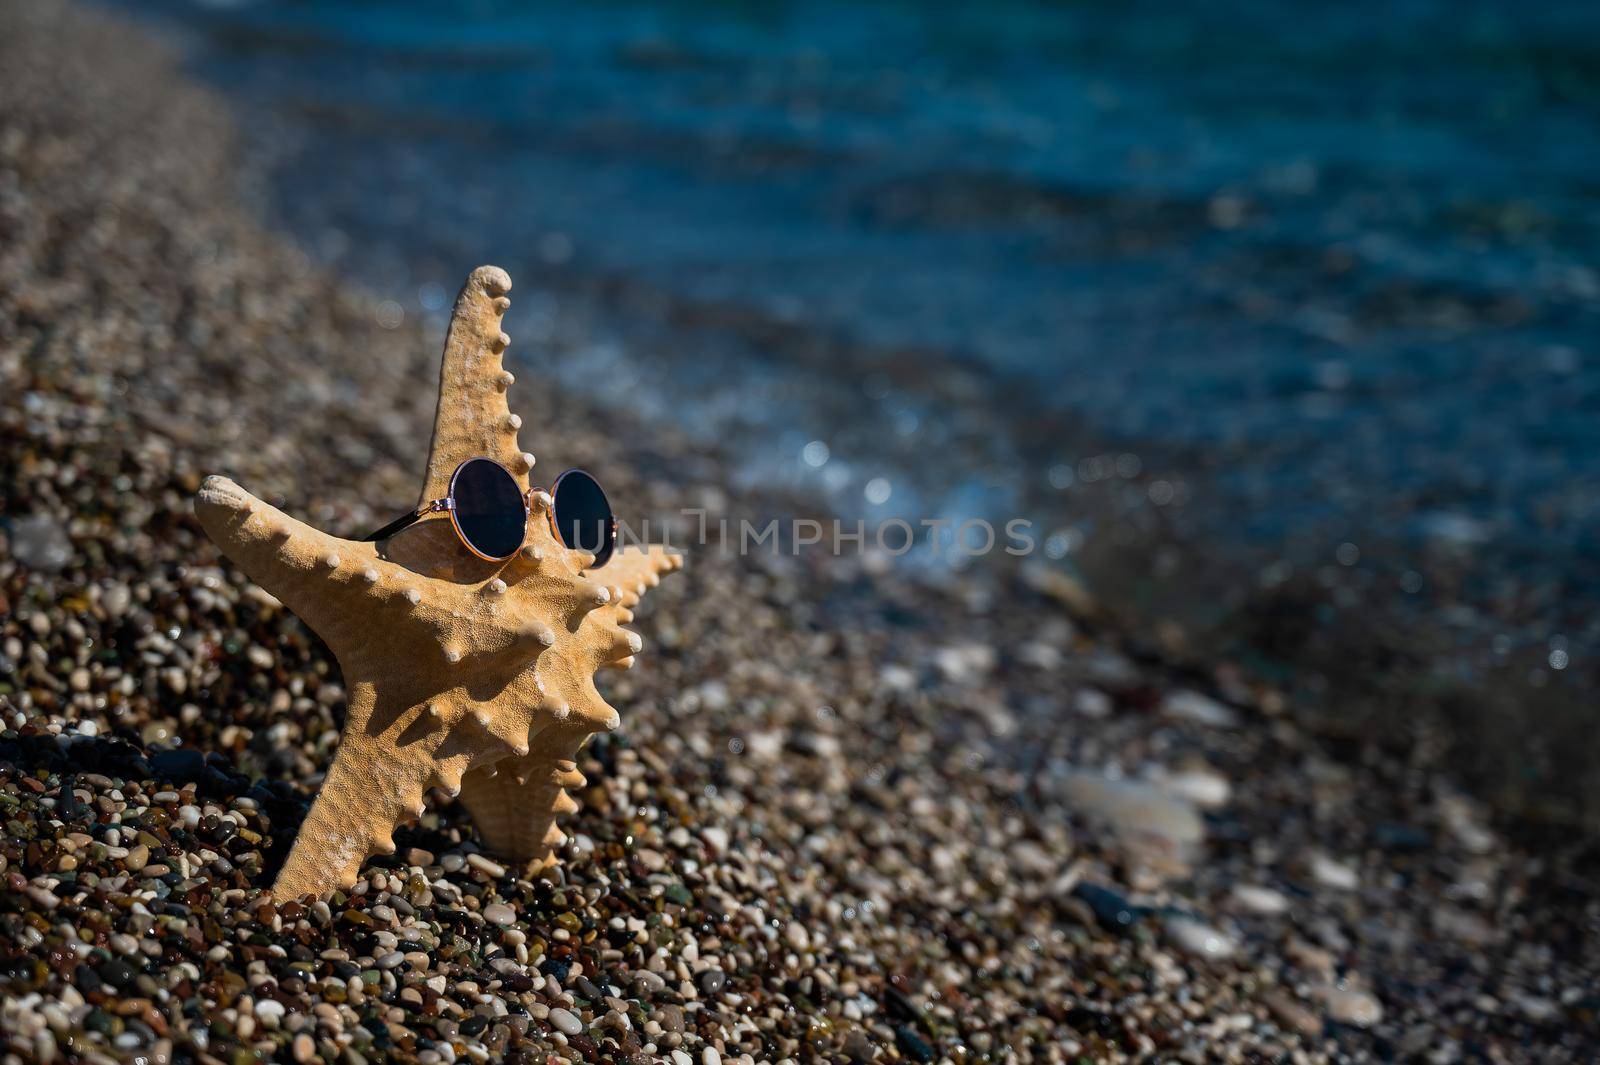 Starfish in sunglasses on a pebble beach by the sea. by mrwed54